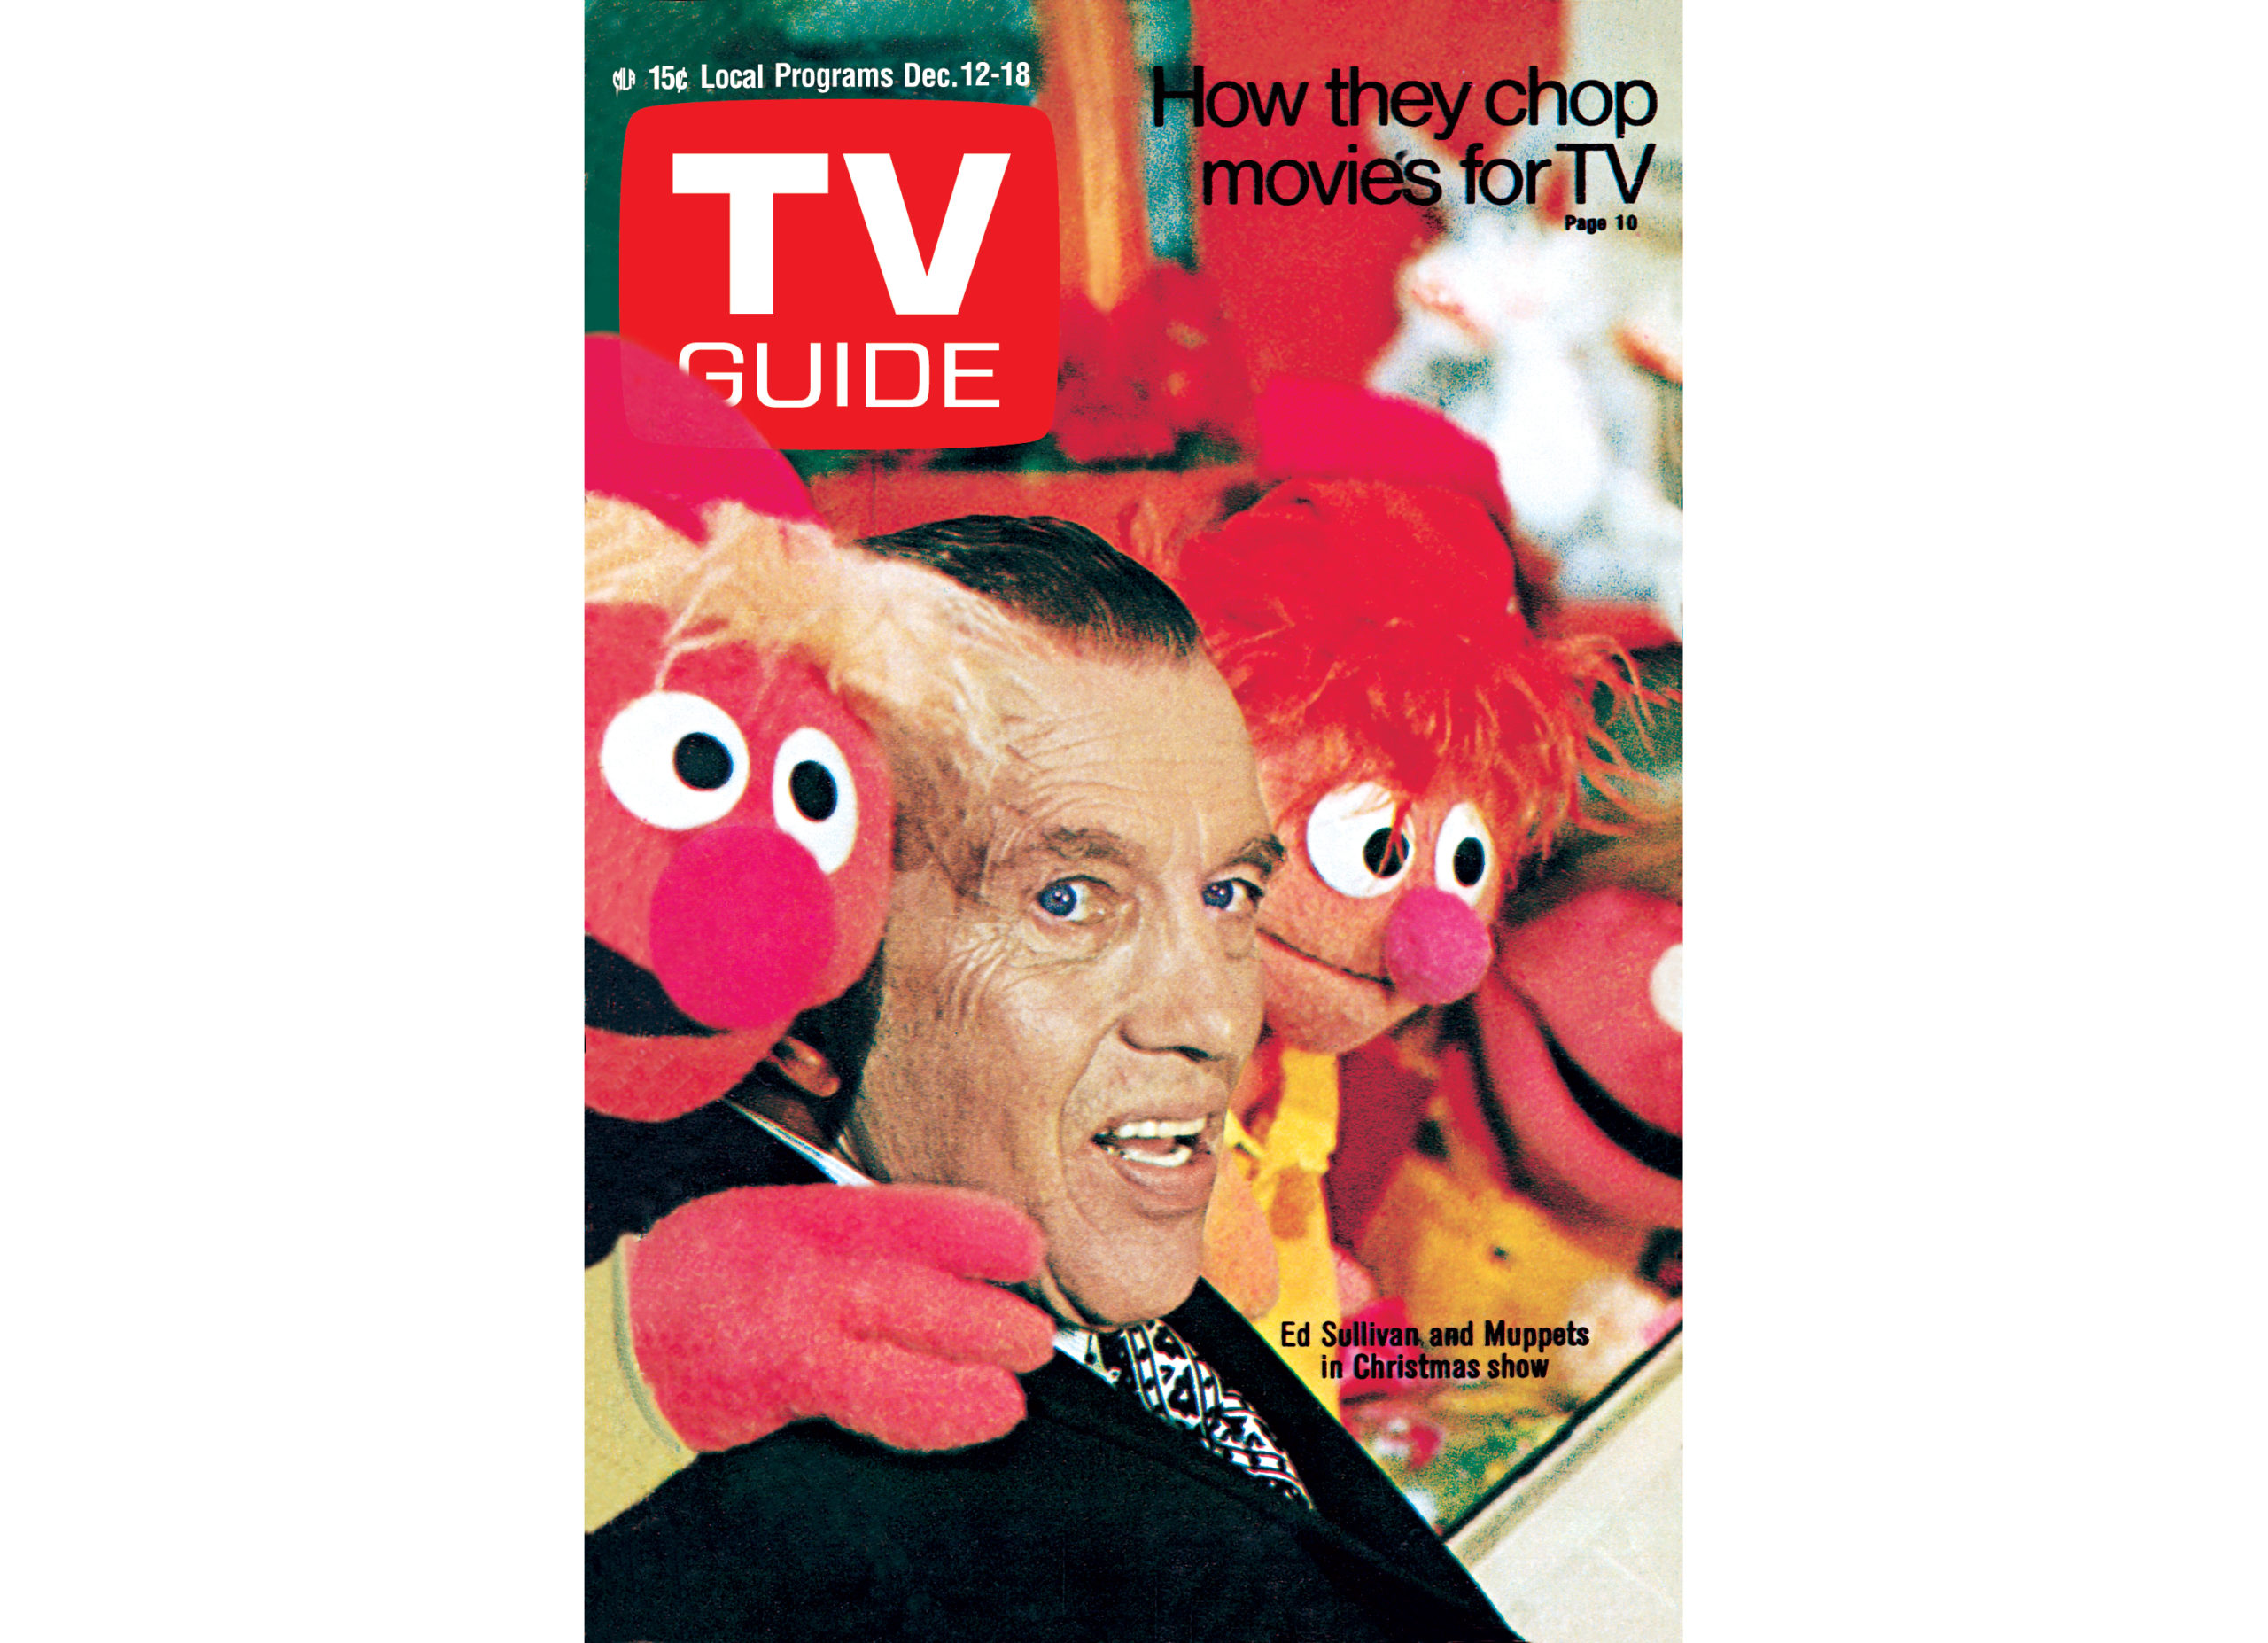 Ed Sullivan and The Muppets on the cover of TV Guide Magazine - December 12, 1970